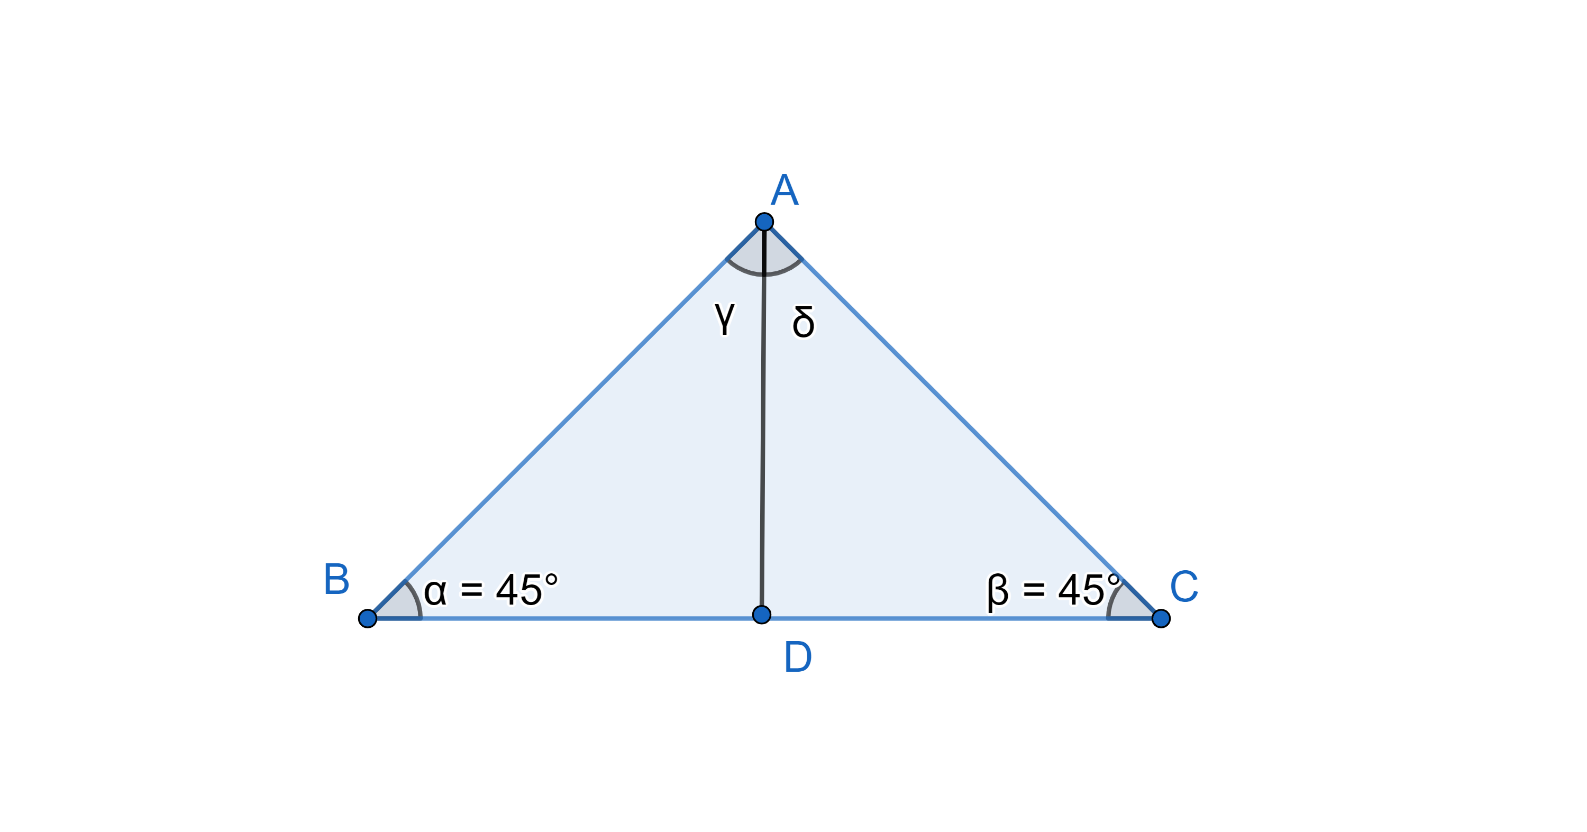 What is one proof of the converse of the Isosceles Triangle Theorem?